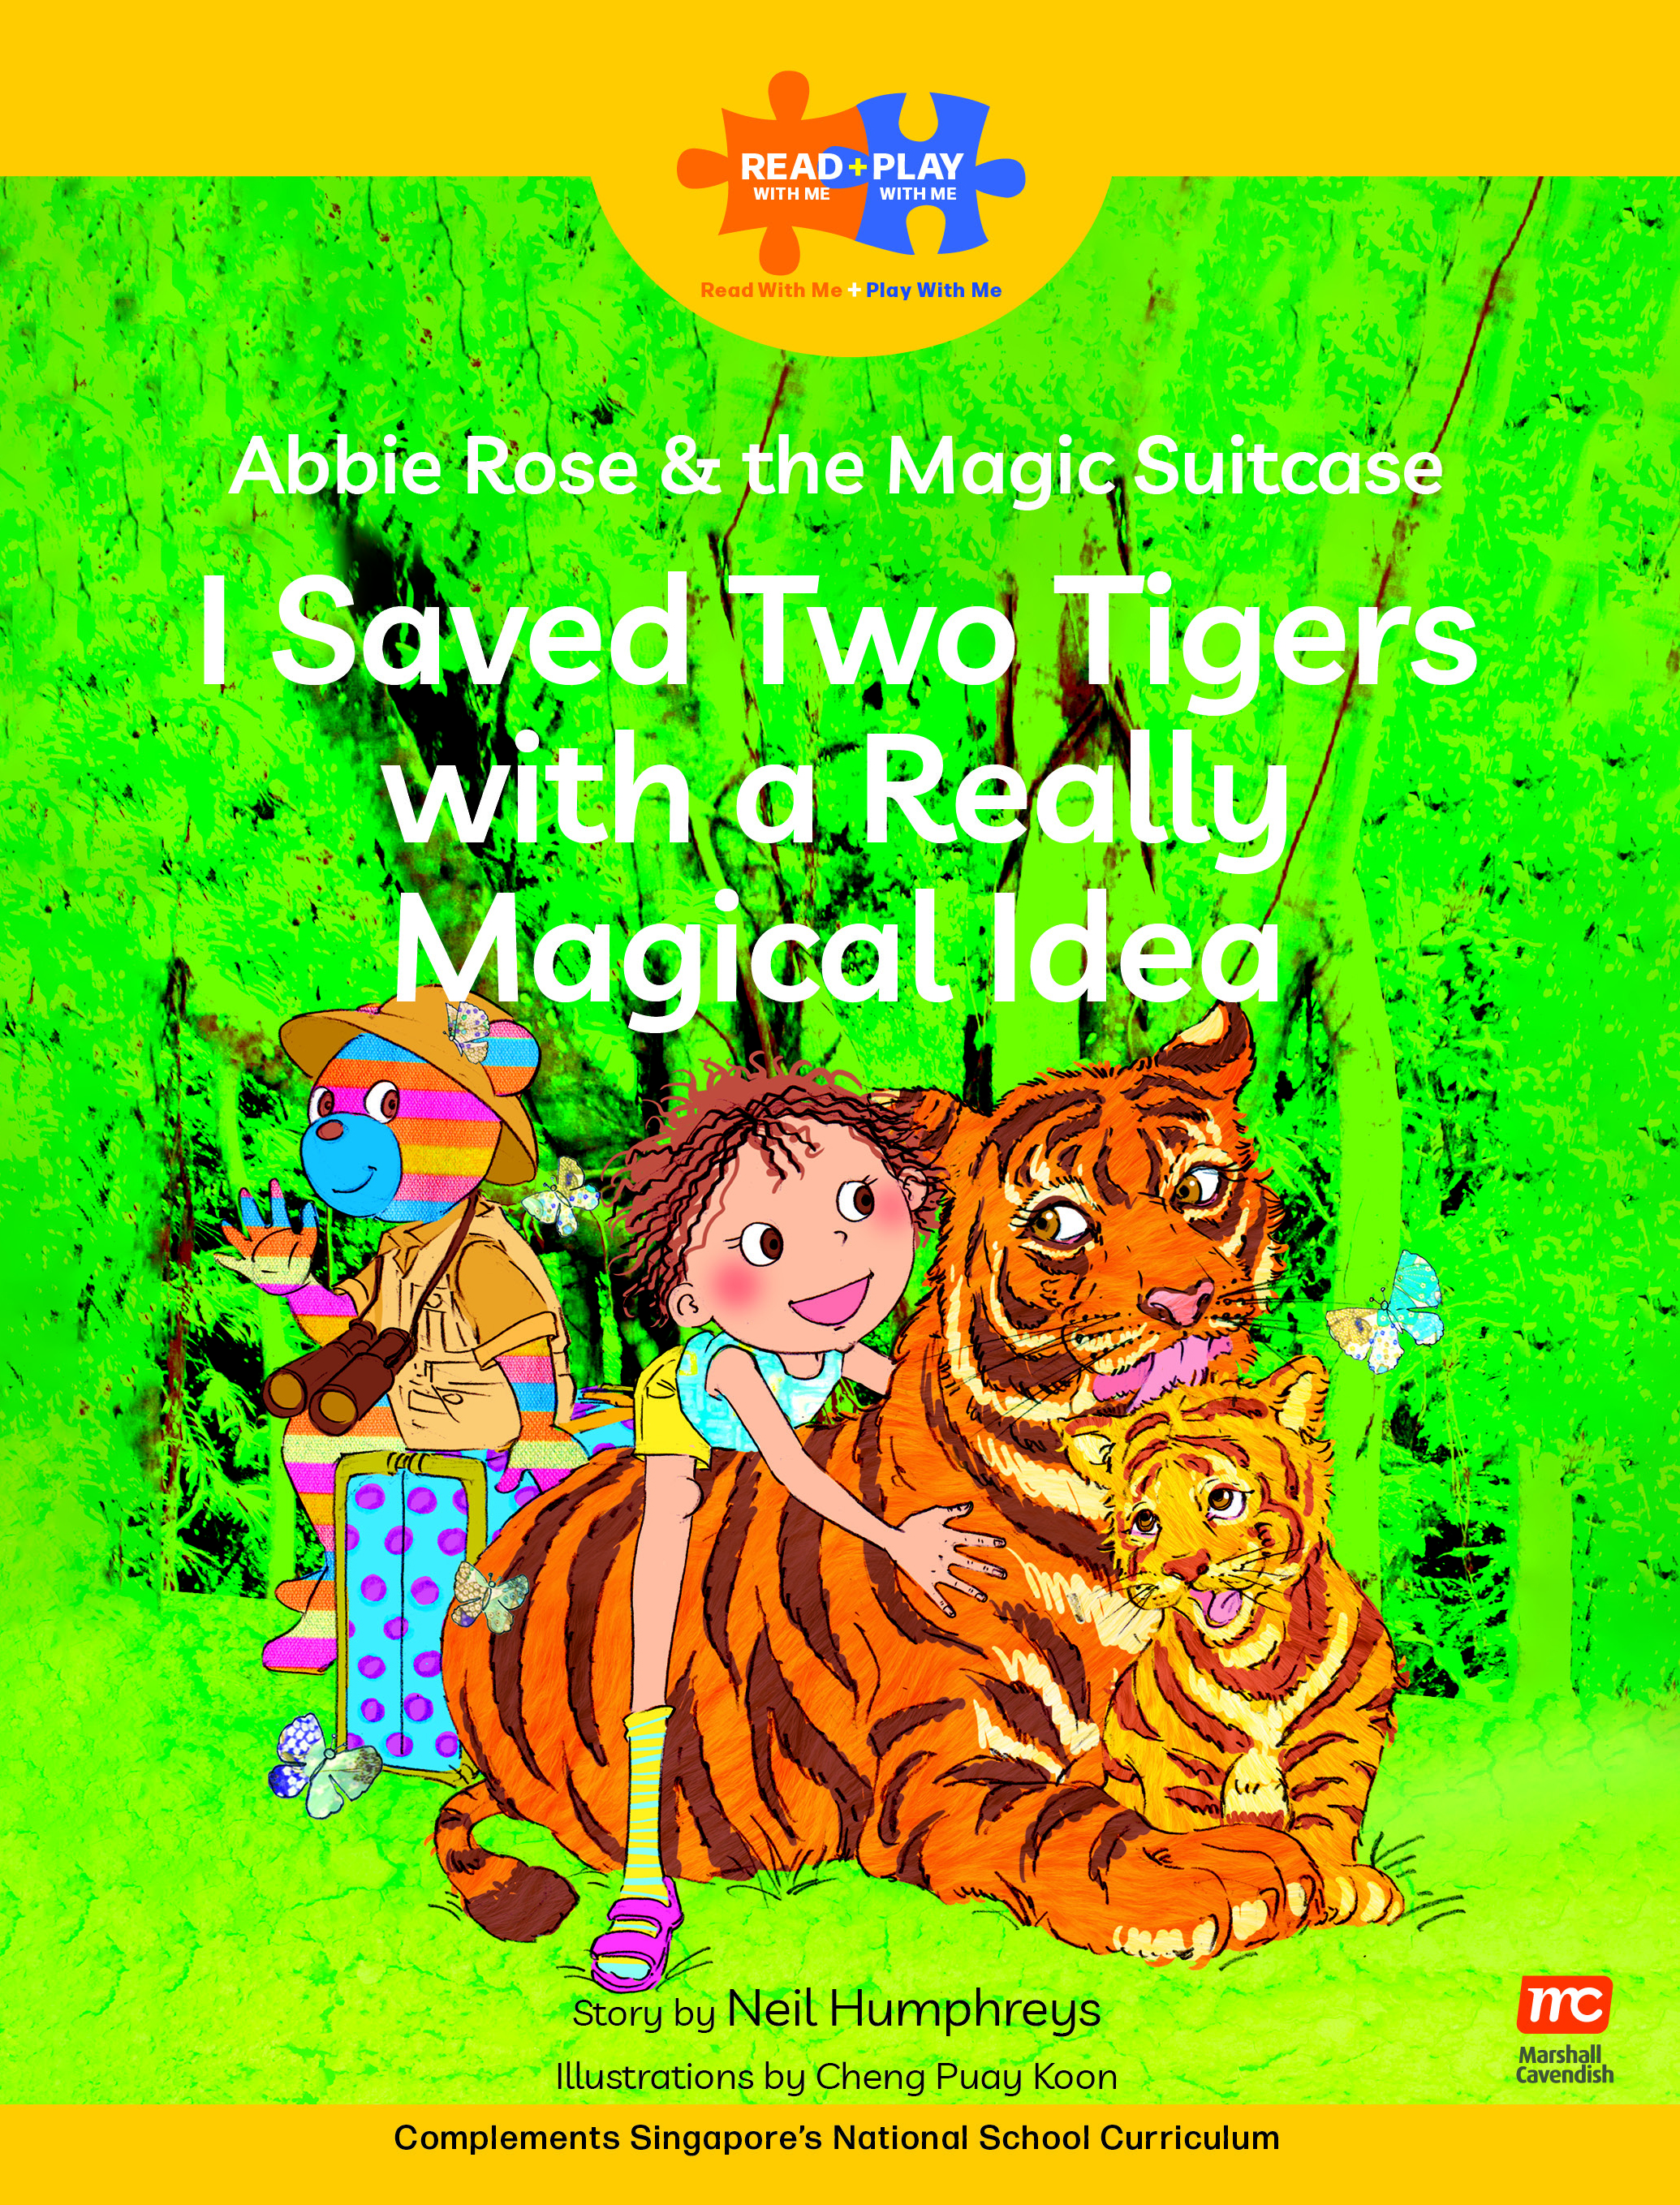 Social Skills I saved Two Tigers with a really magical idea Cover.jpg